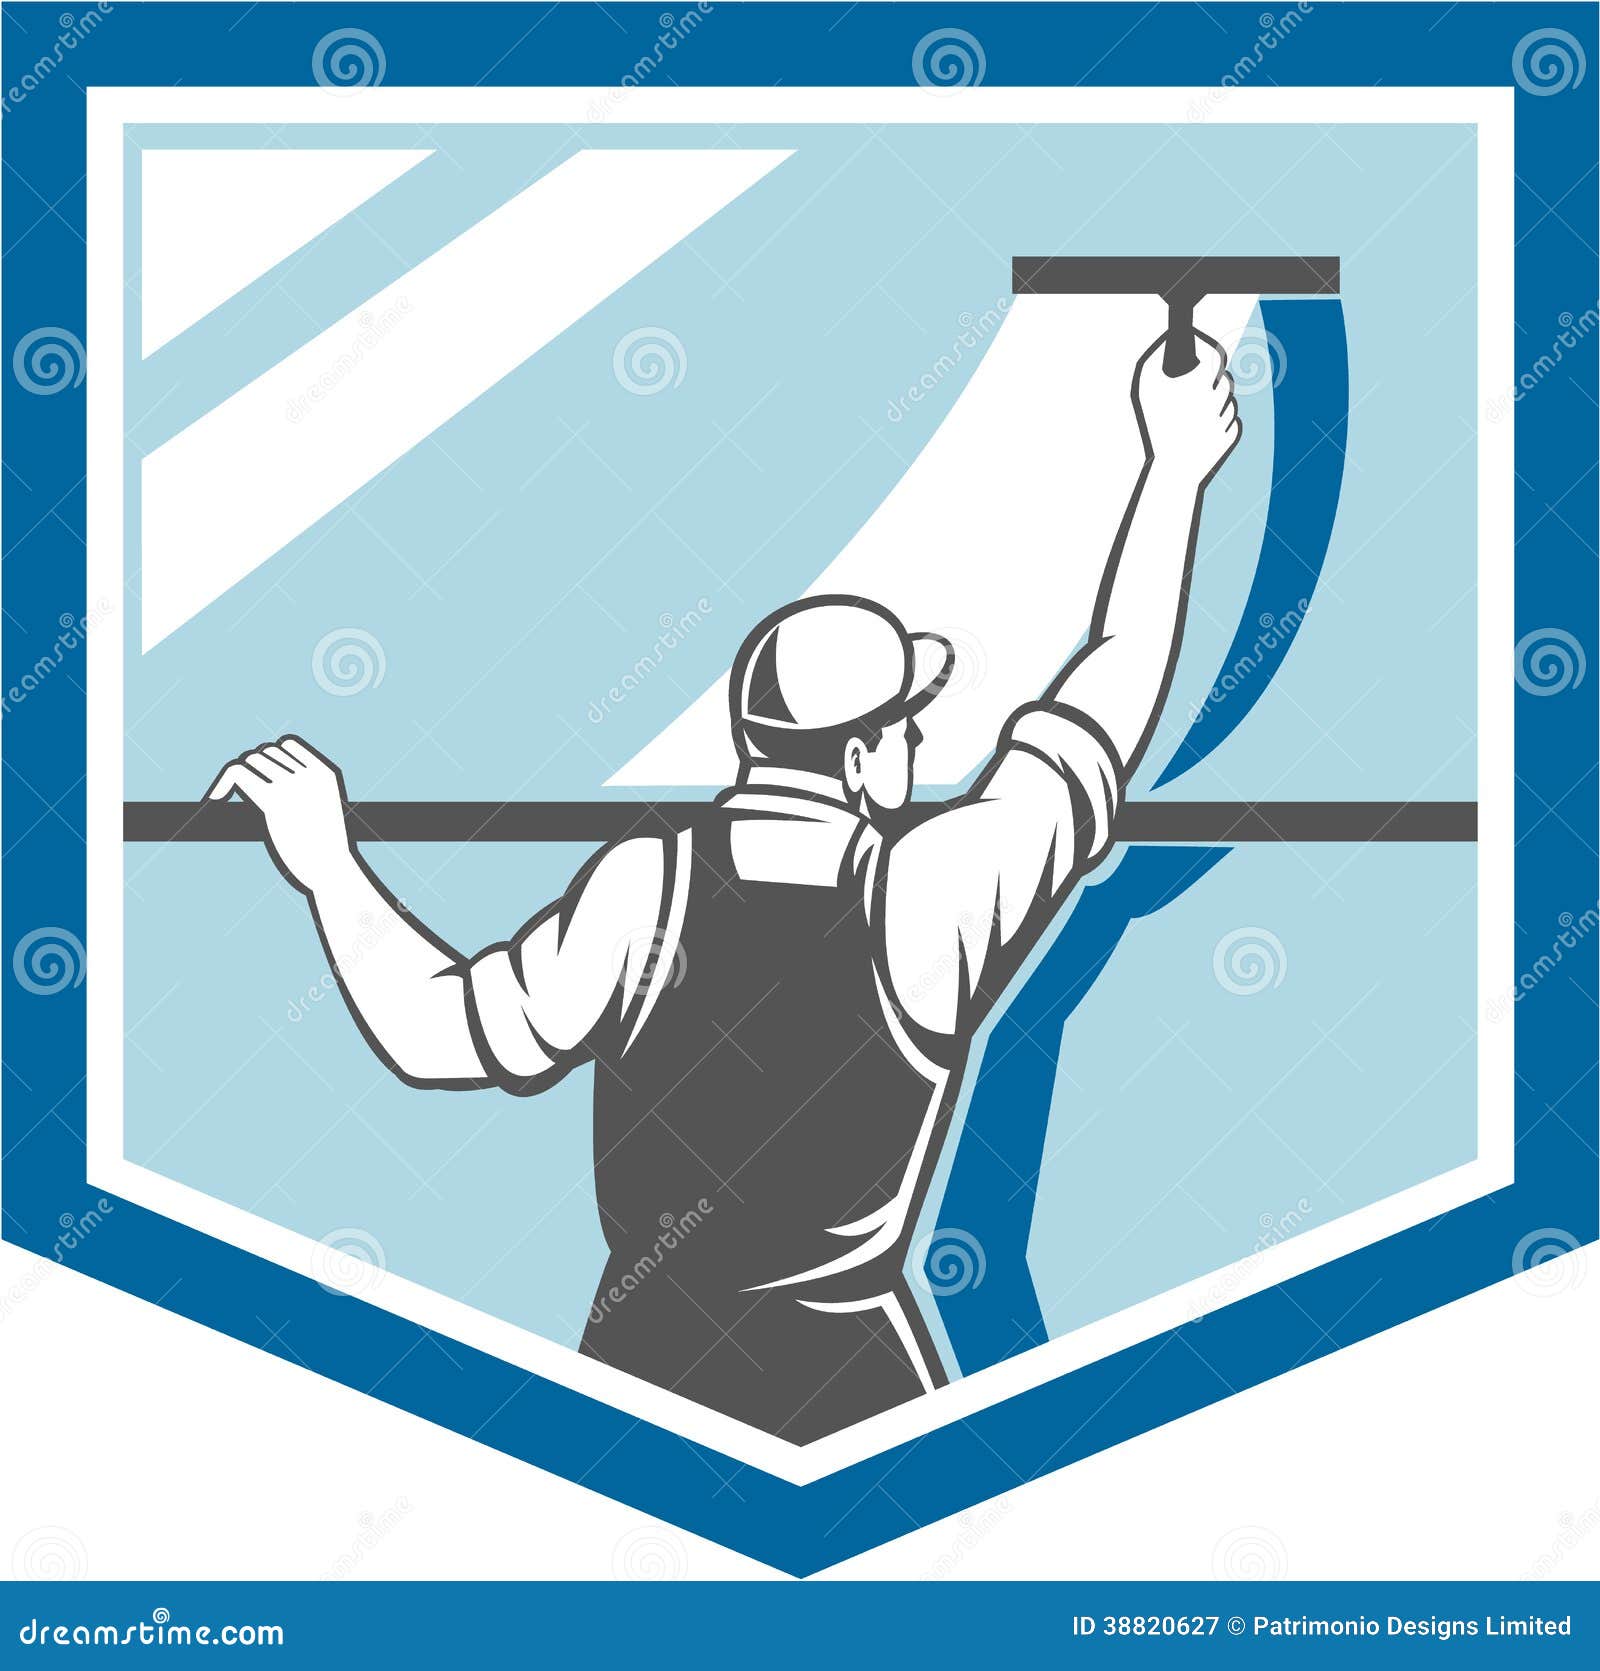 clipart window cleaning - photo #29